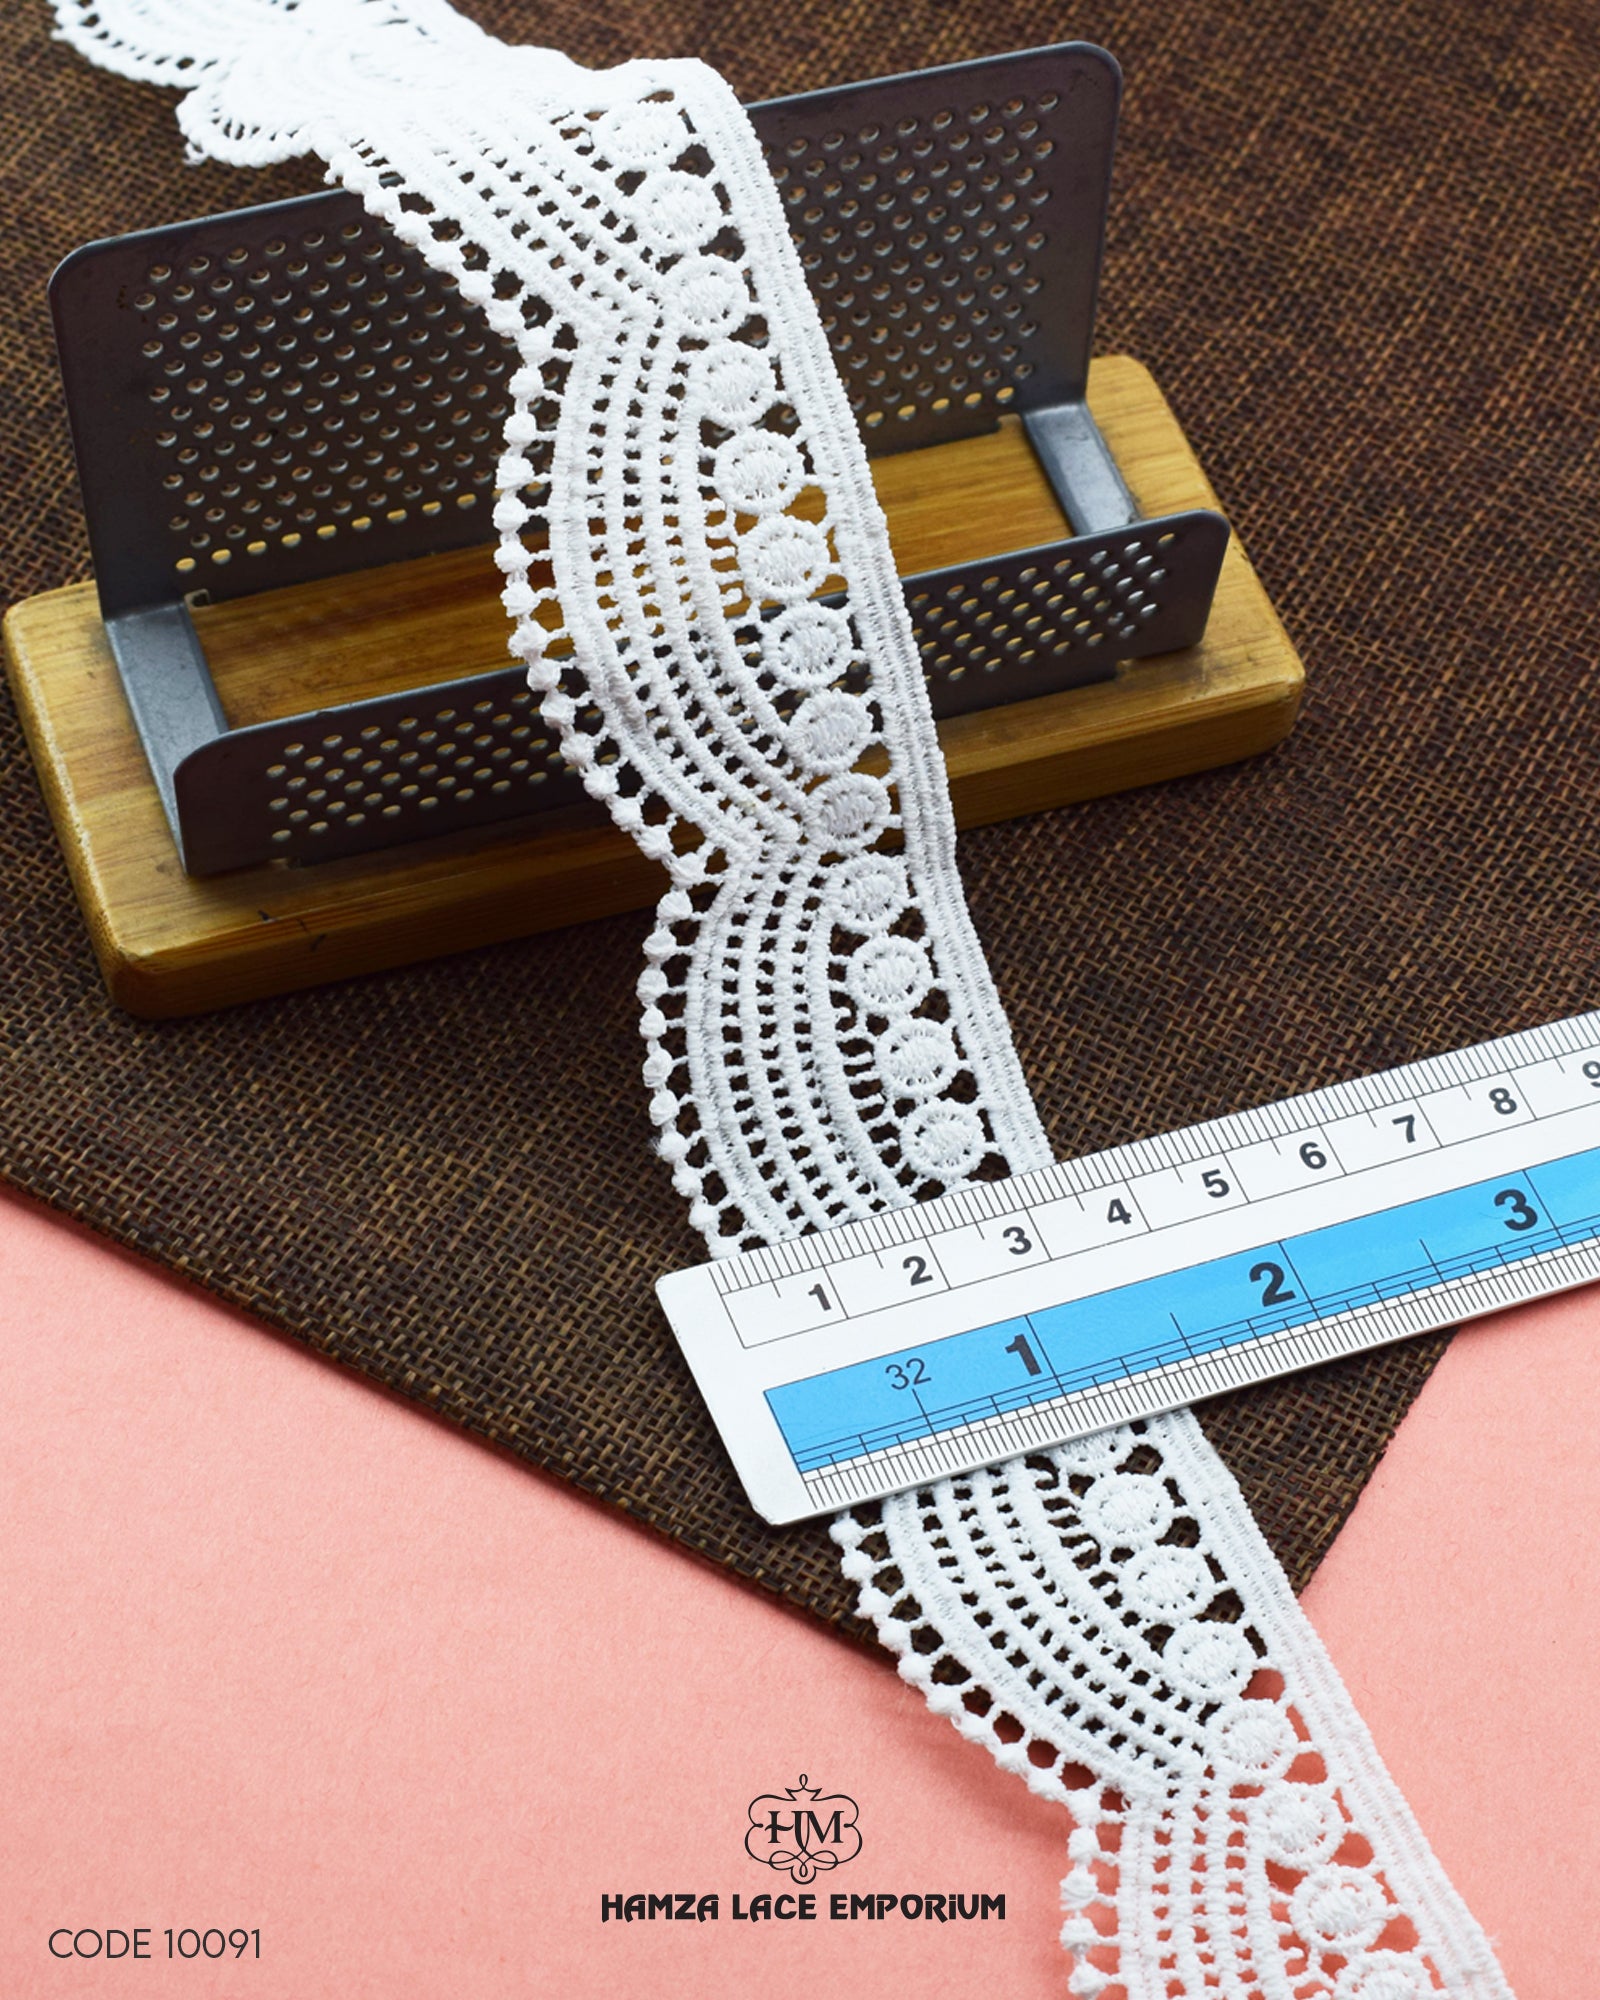 Size of the 'Edging Scallop Lace 10091' is shown as '1.5' inches with the help of a ruler